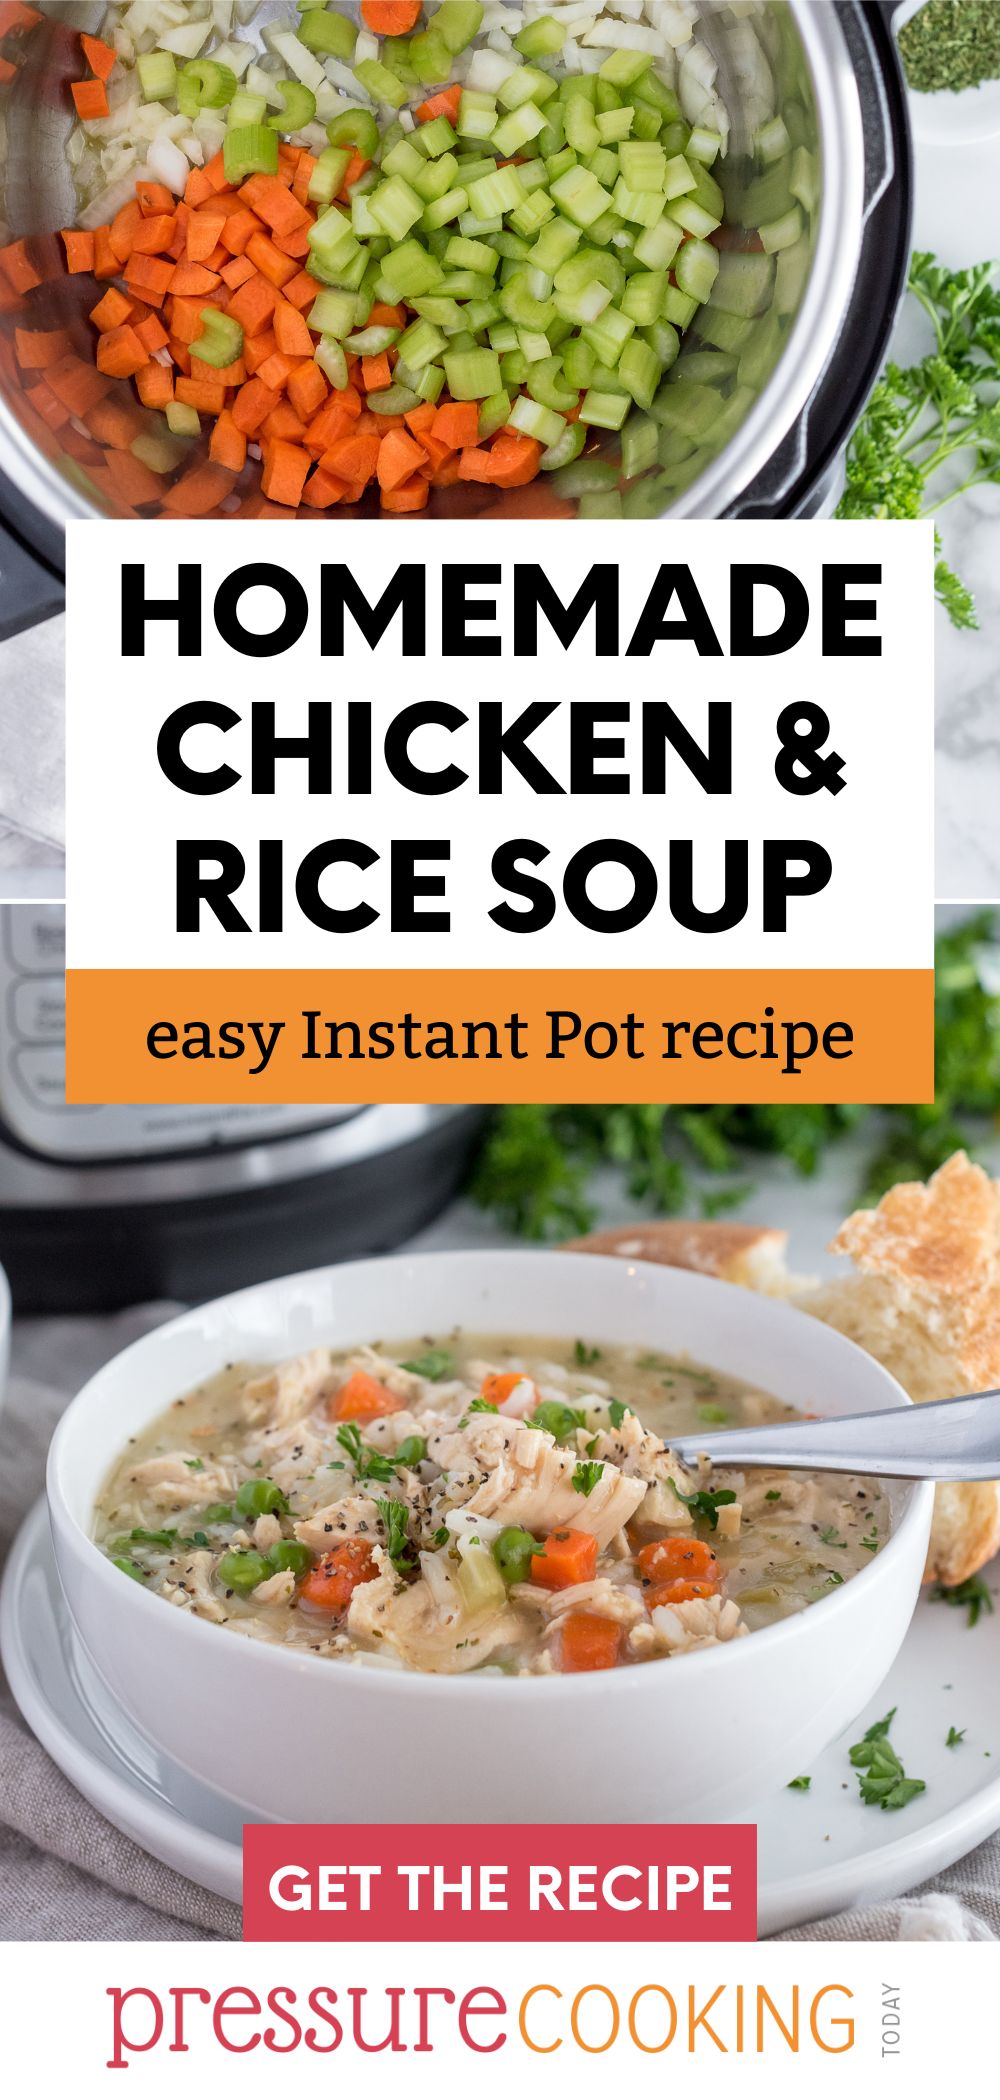 a pinterest button for Homemade Chicken and Rice soup: easy Instant Pot recipe, overlaid on two photos: one of the veggies in the Instant Pot, the other of the finished soup in a white bowl with a silver spoon. via @PressureCook2da